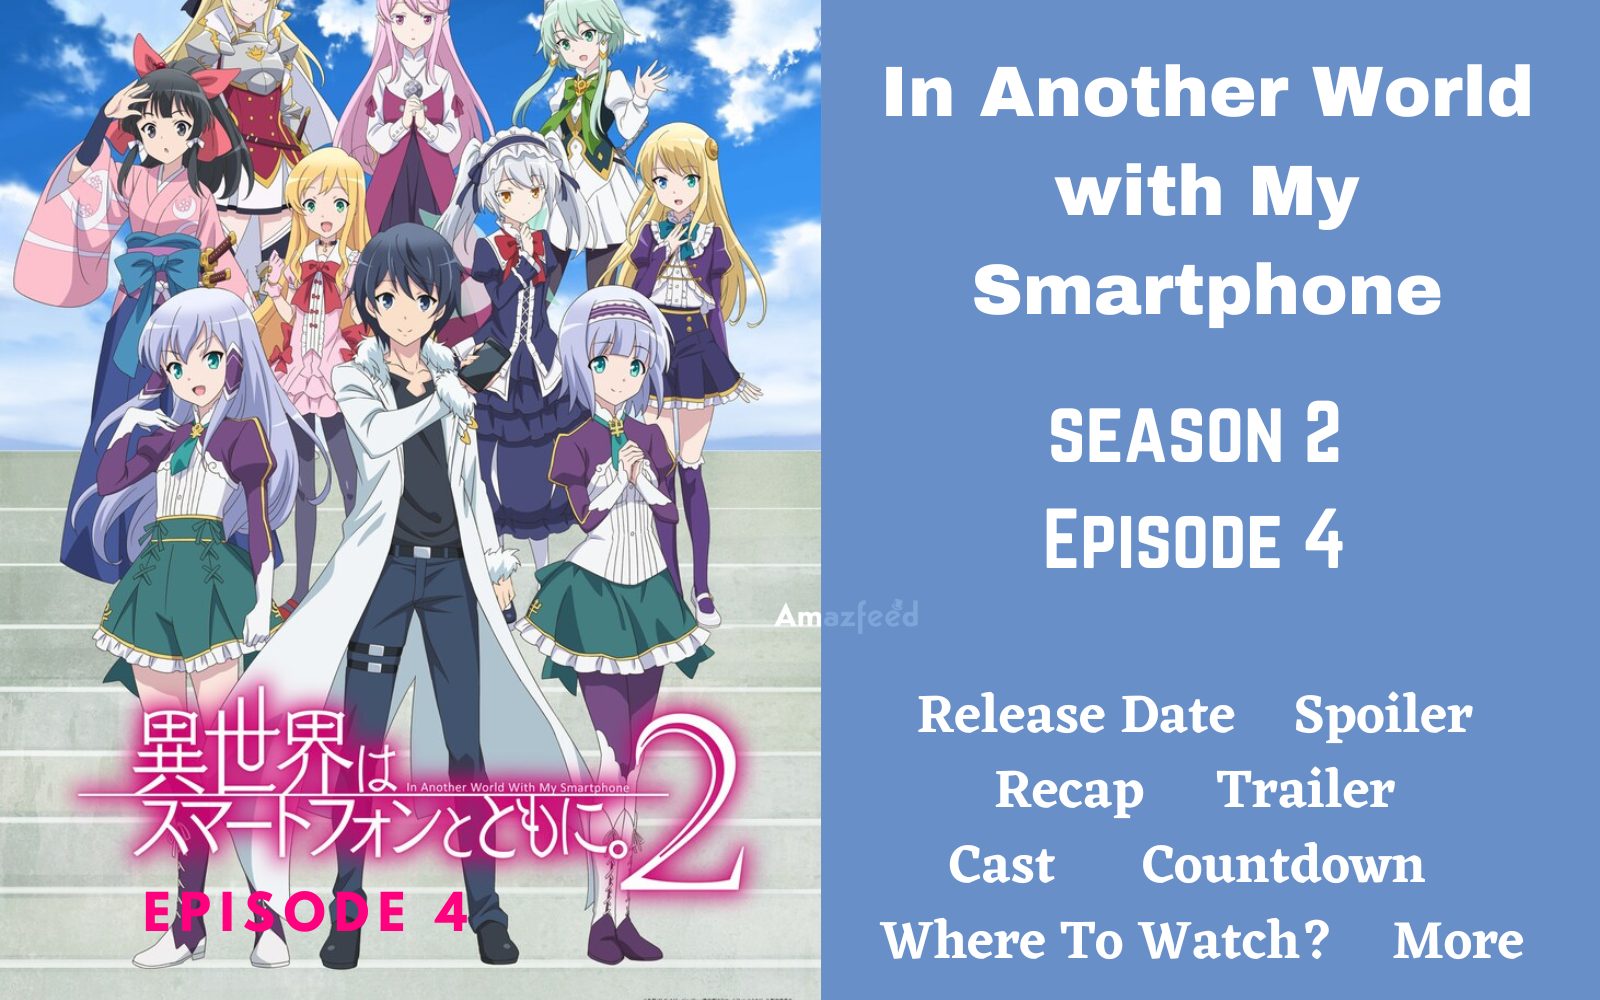 In Another World With My Smartphone Season 2, episode 4: In